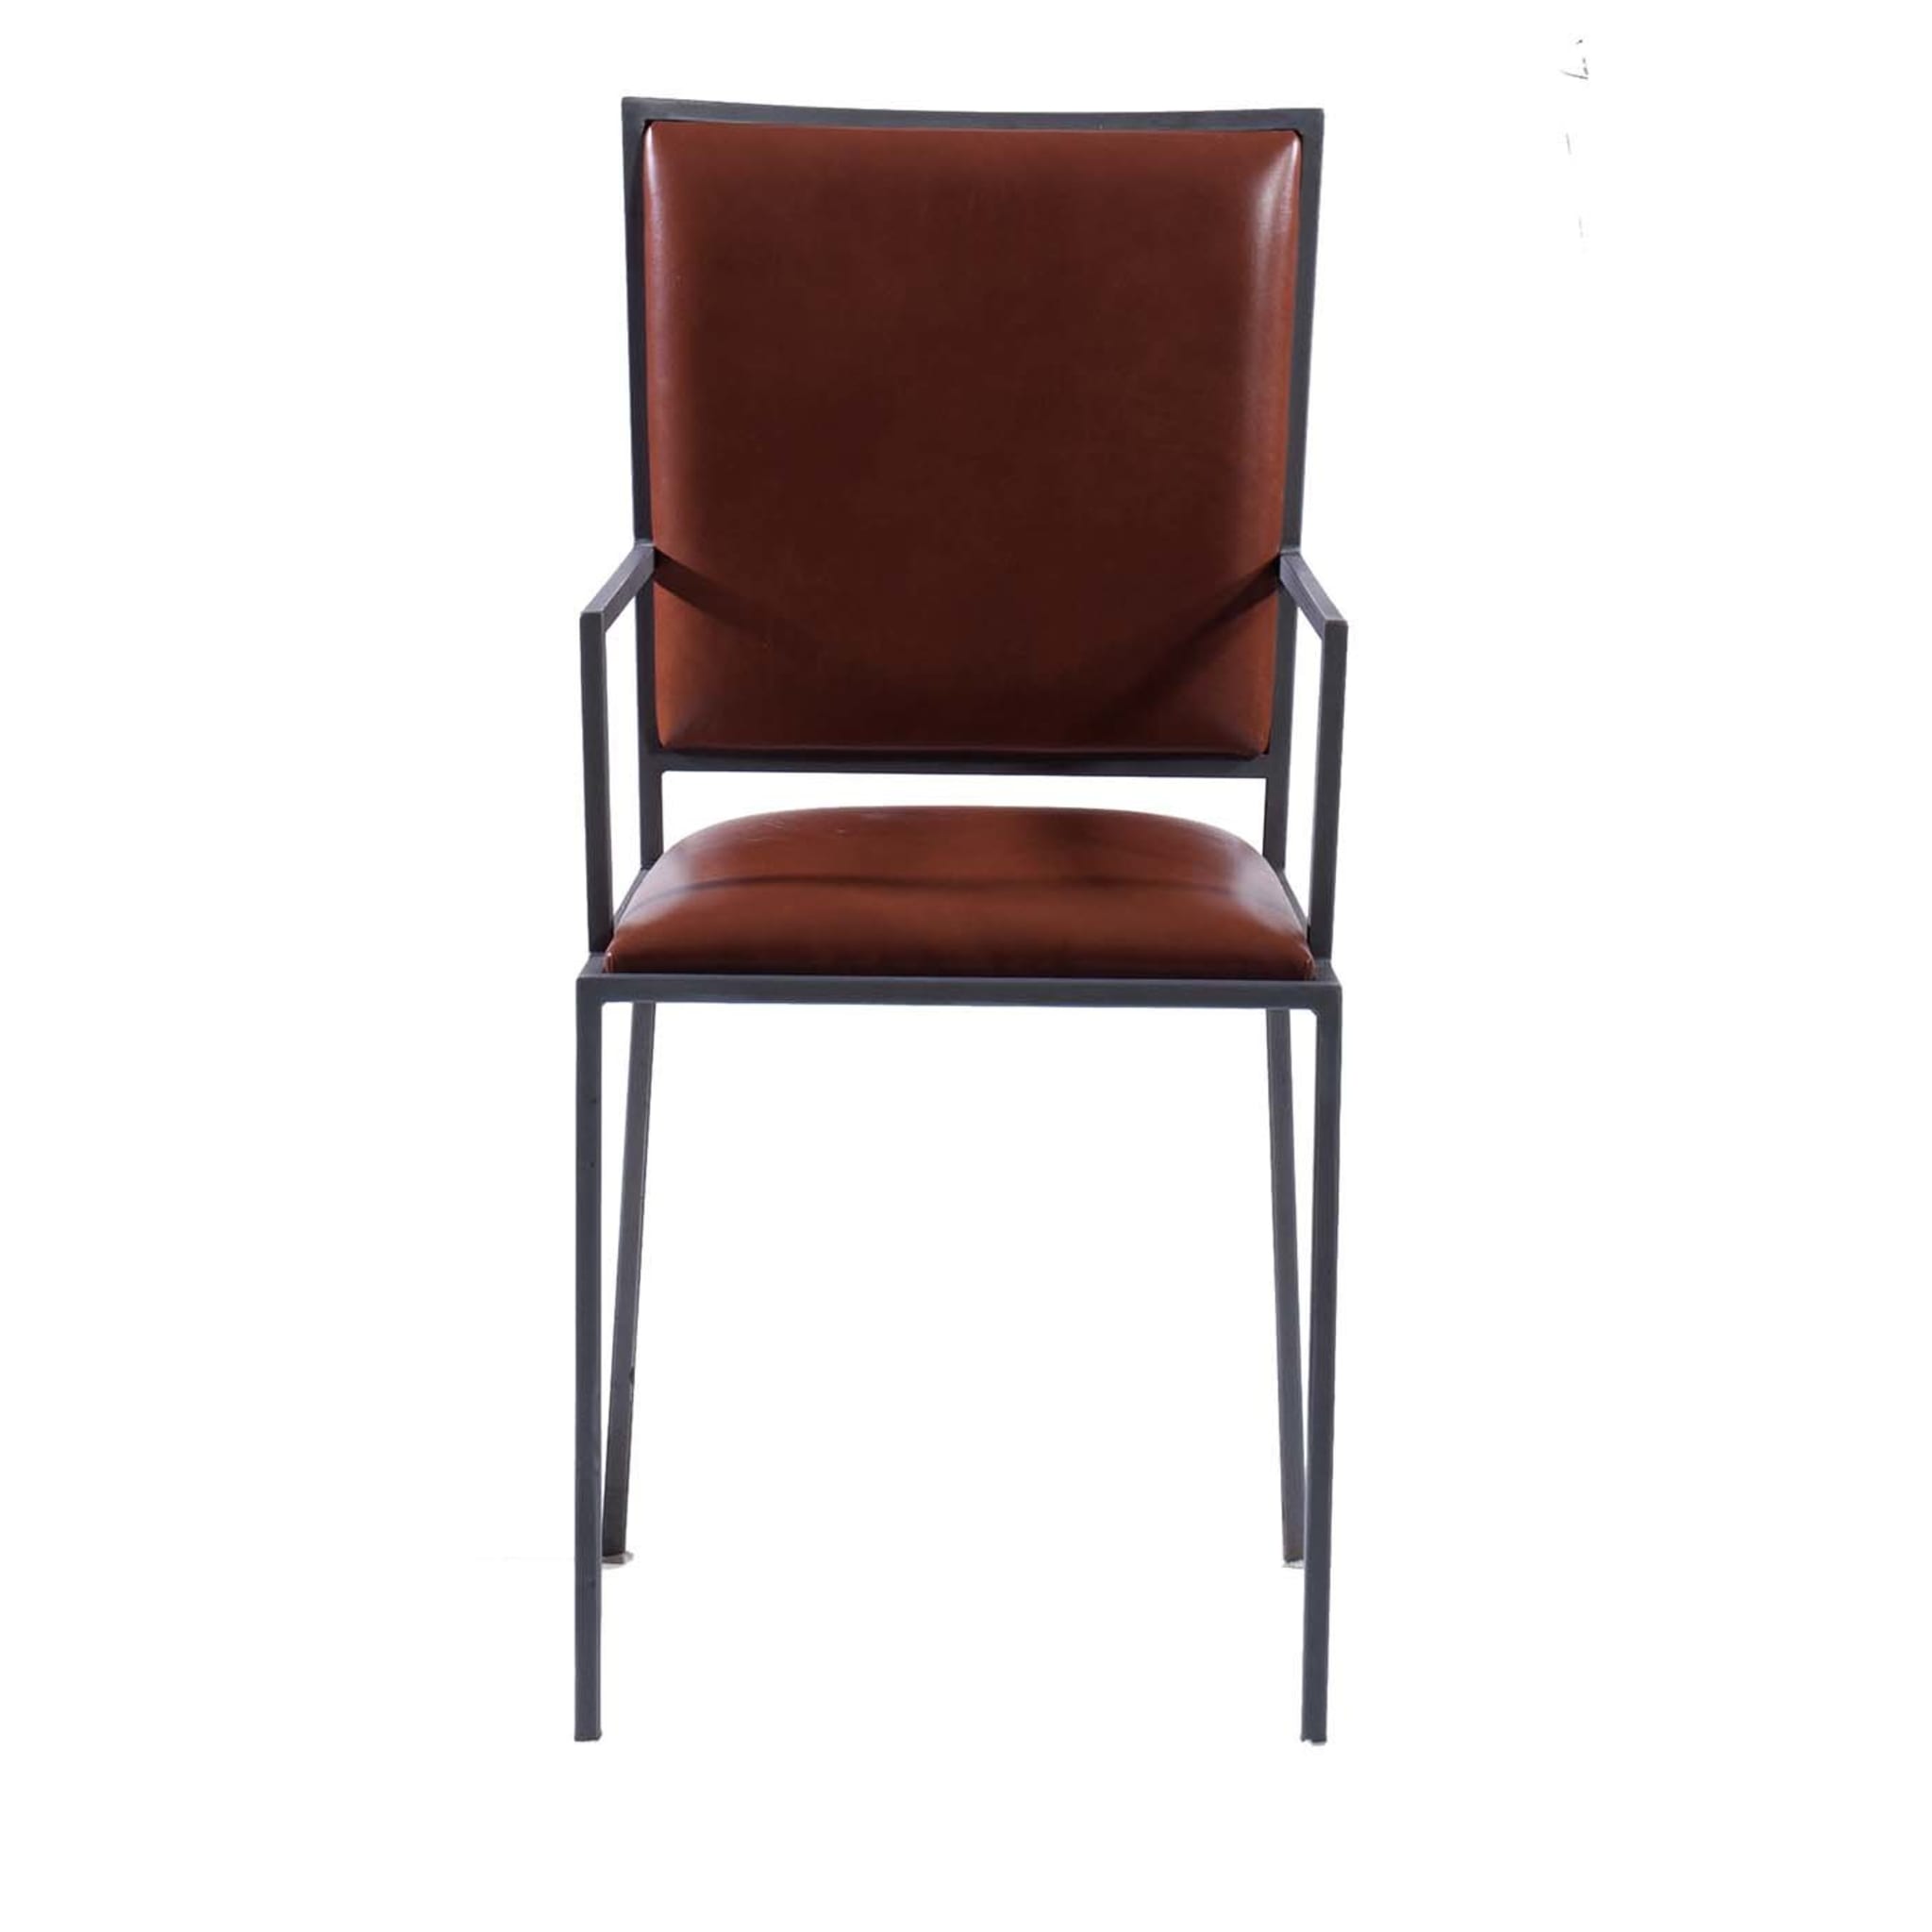 The Simple Chair with Armrests in Cognac - Main view